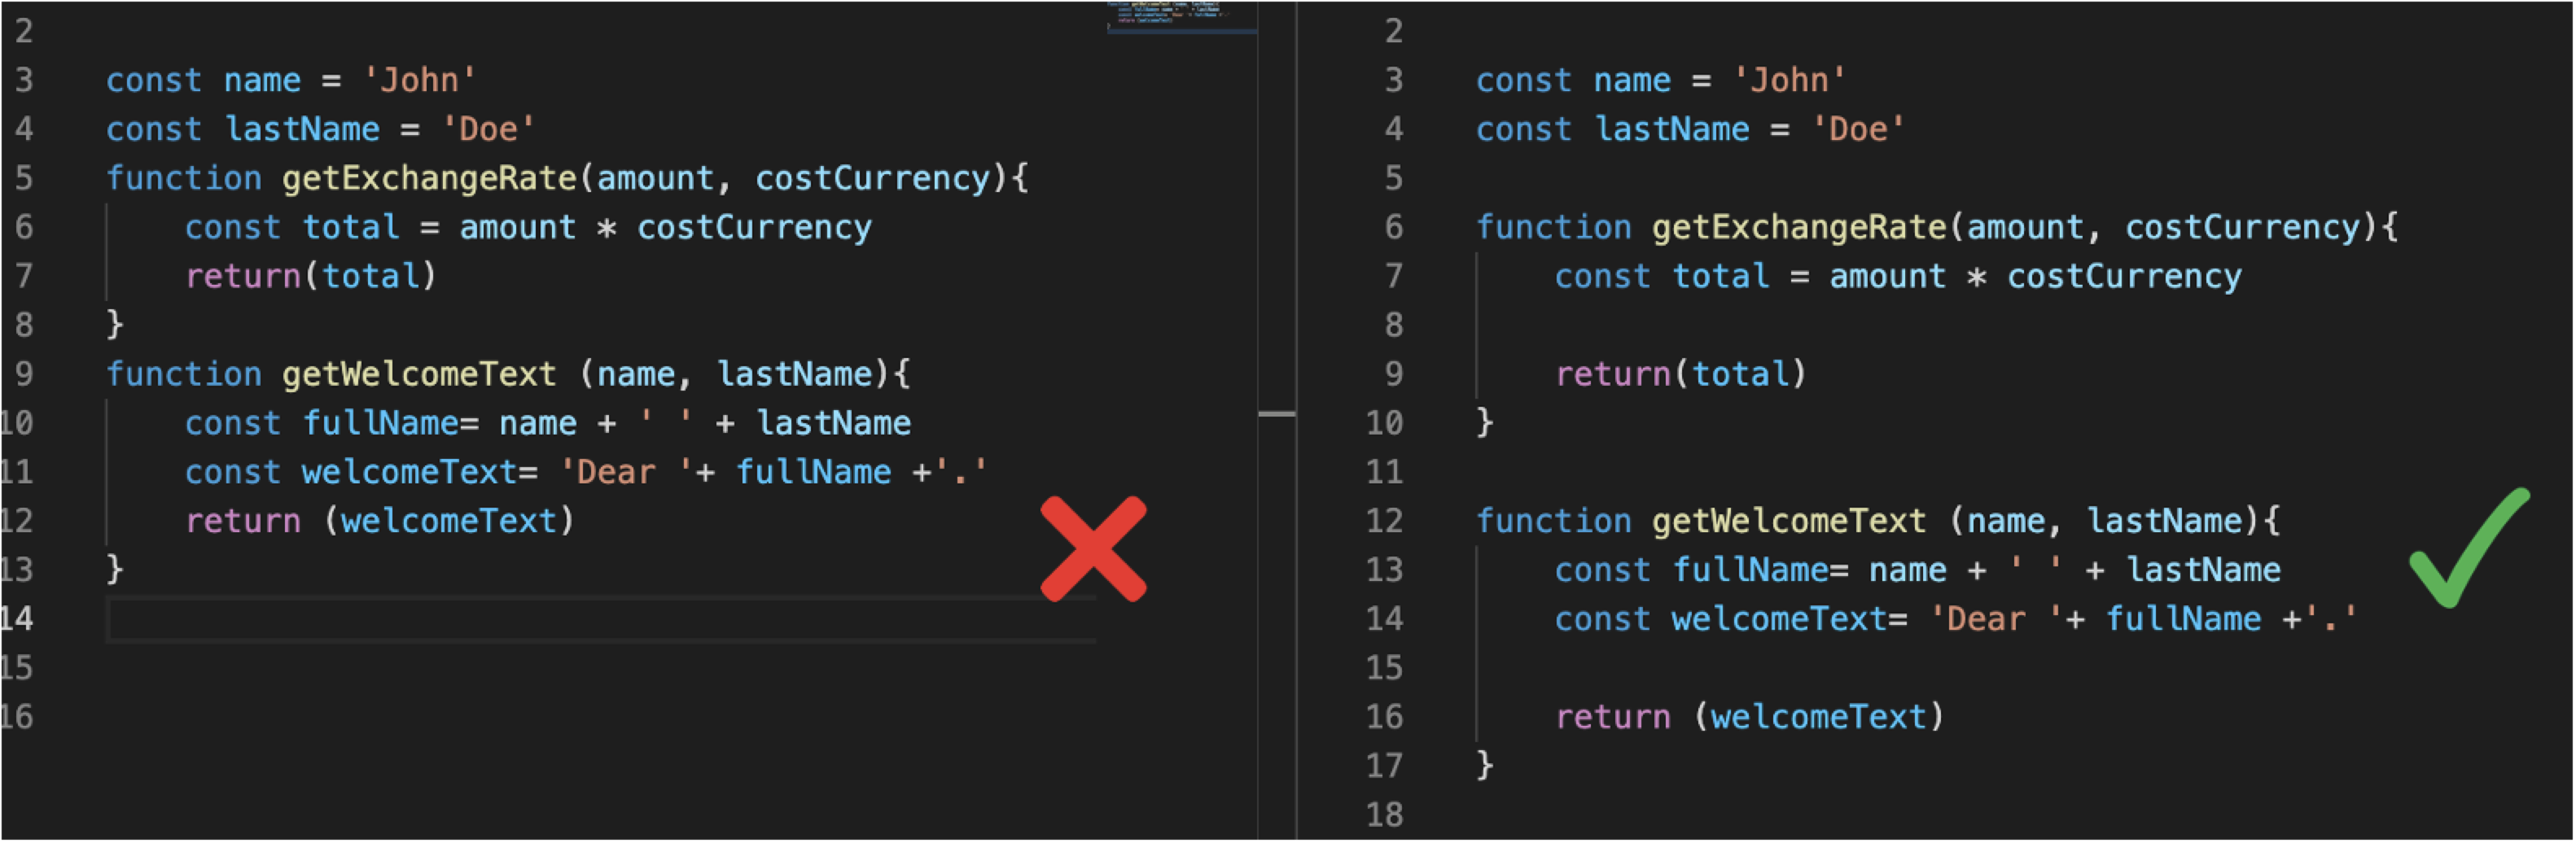 10 Tips For Writing Cleaner Code In Any Programming Language